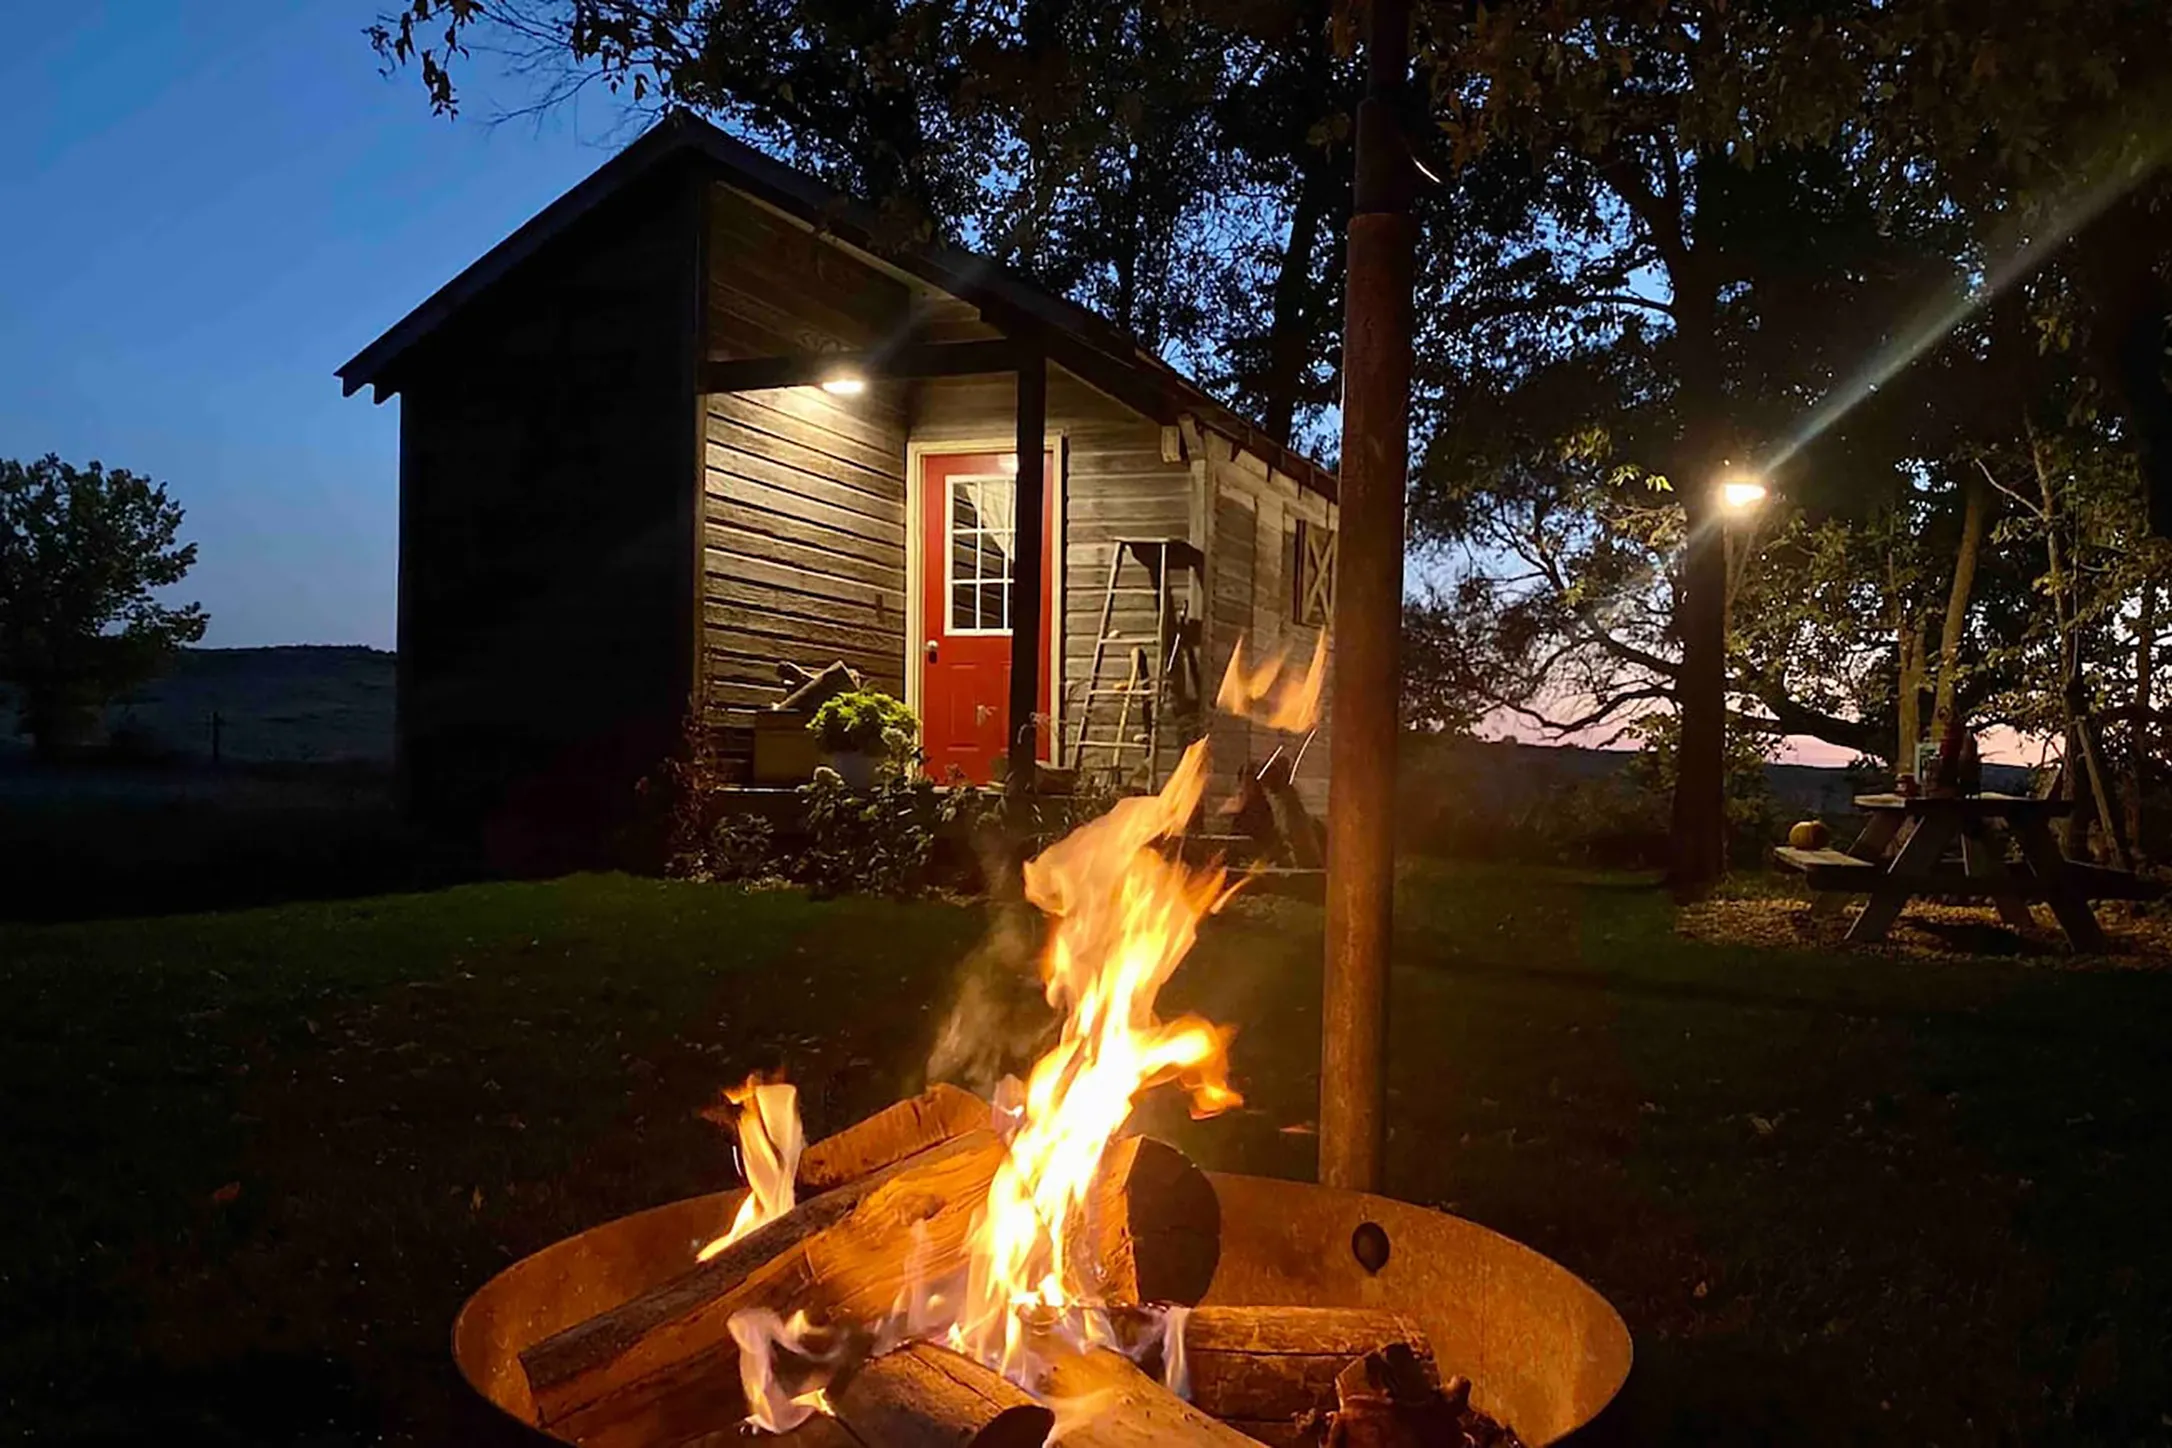 An illuminated fire pit set in front of a dark colored home with a red door. 